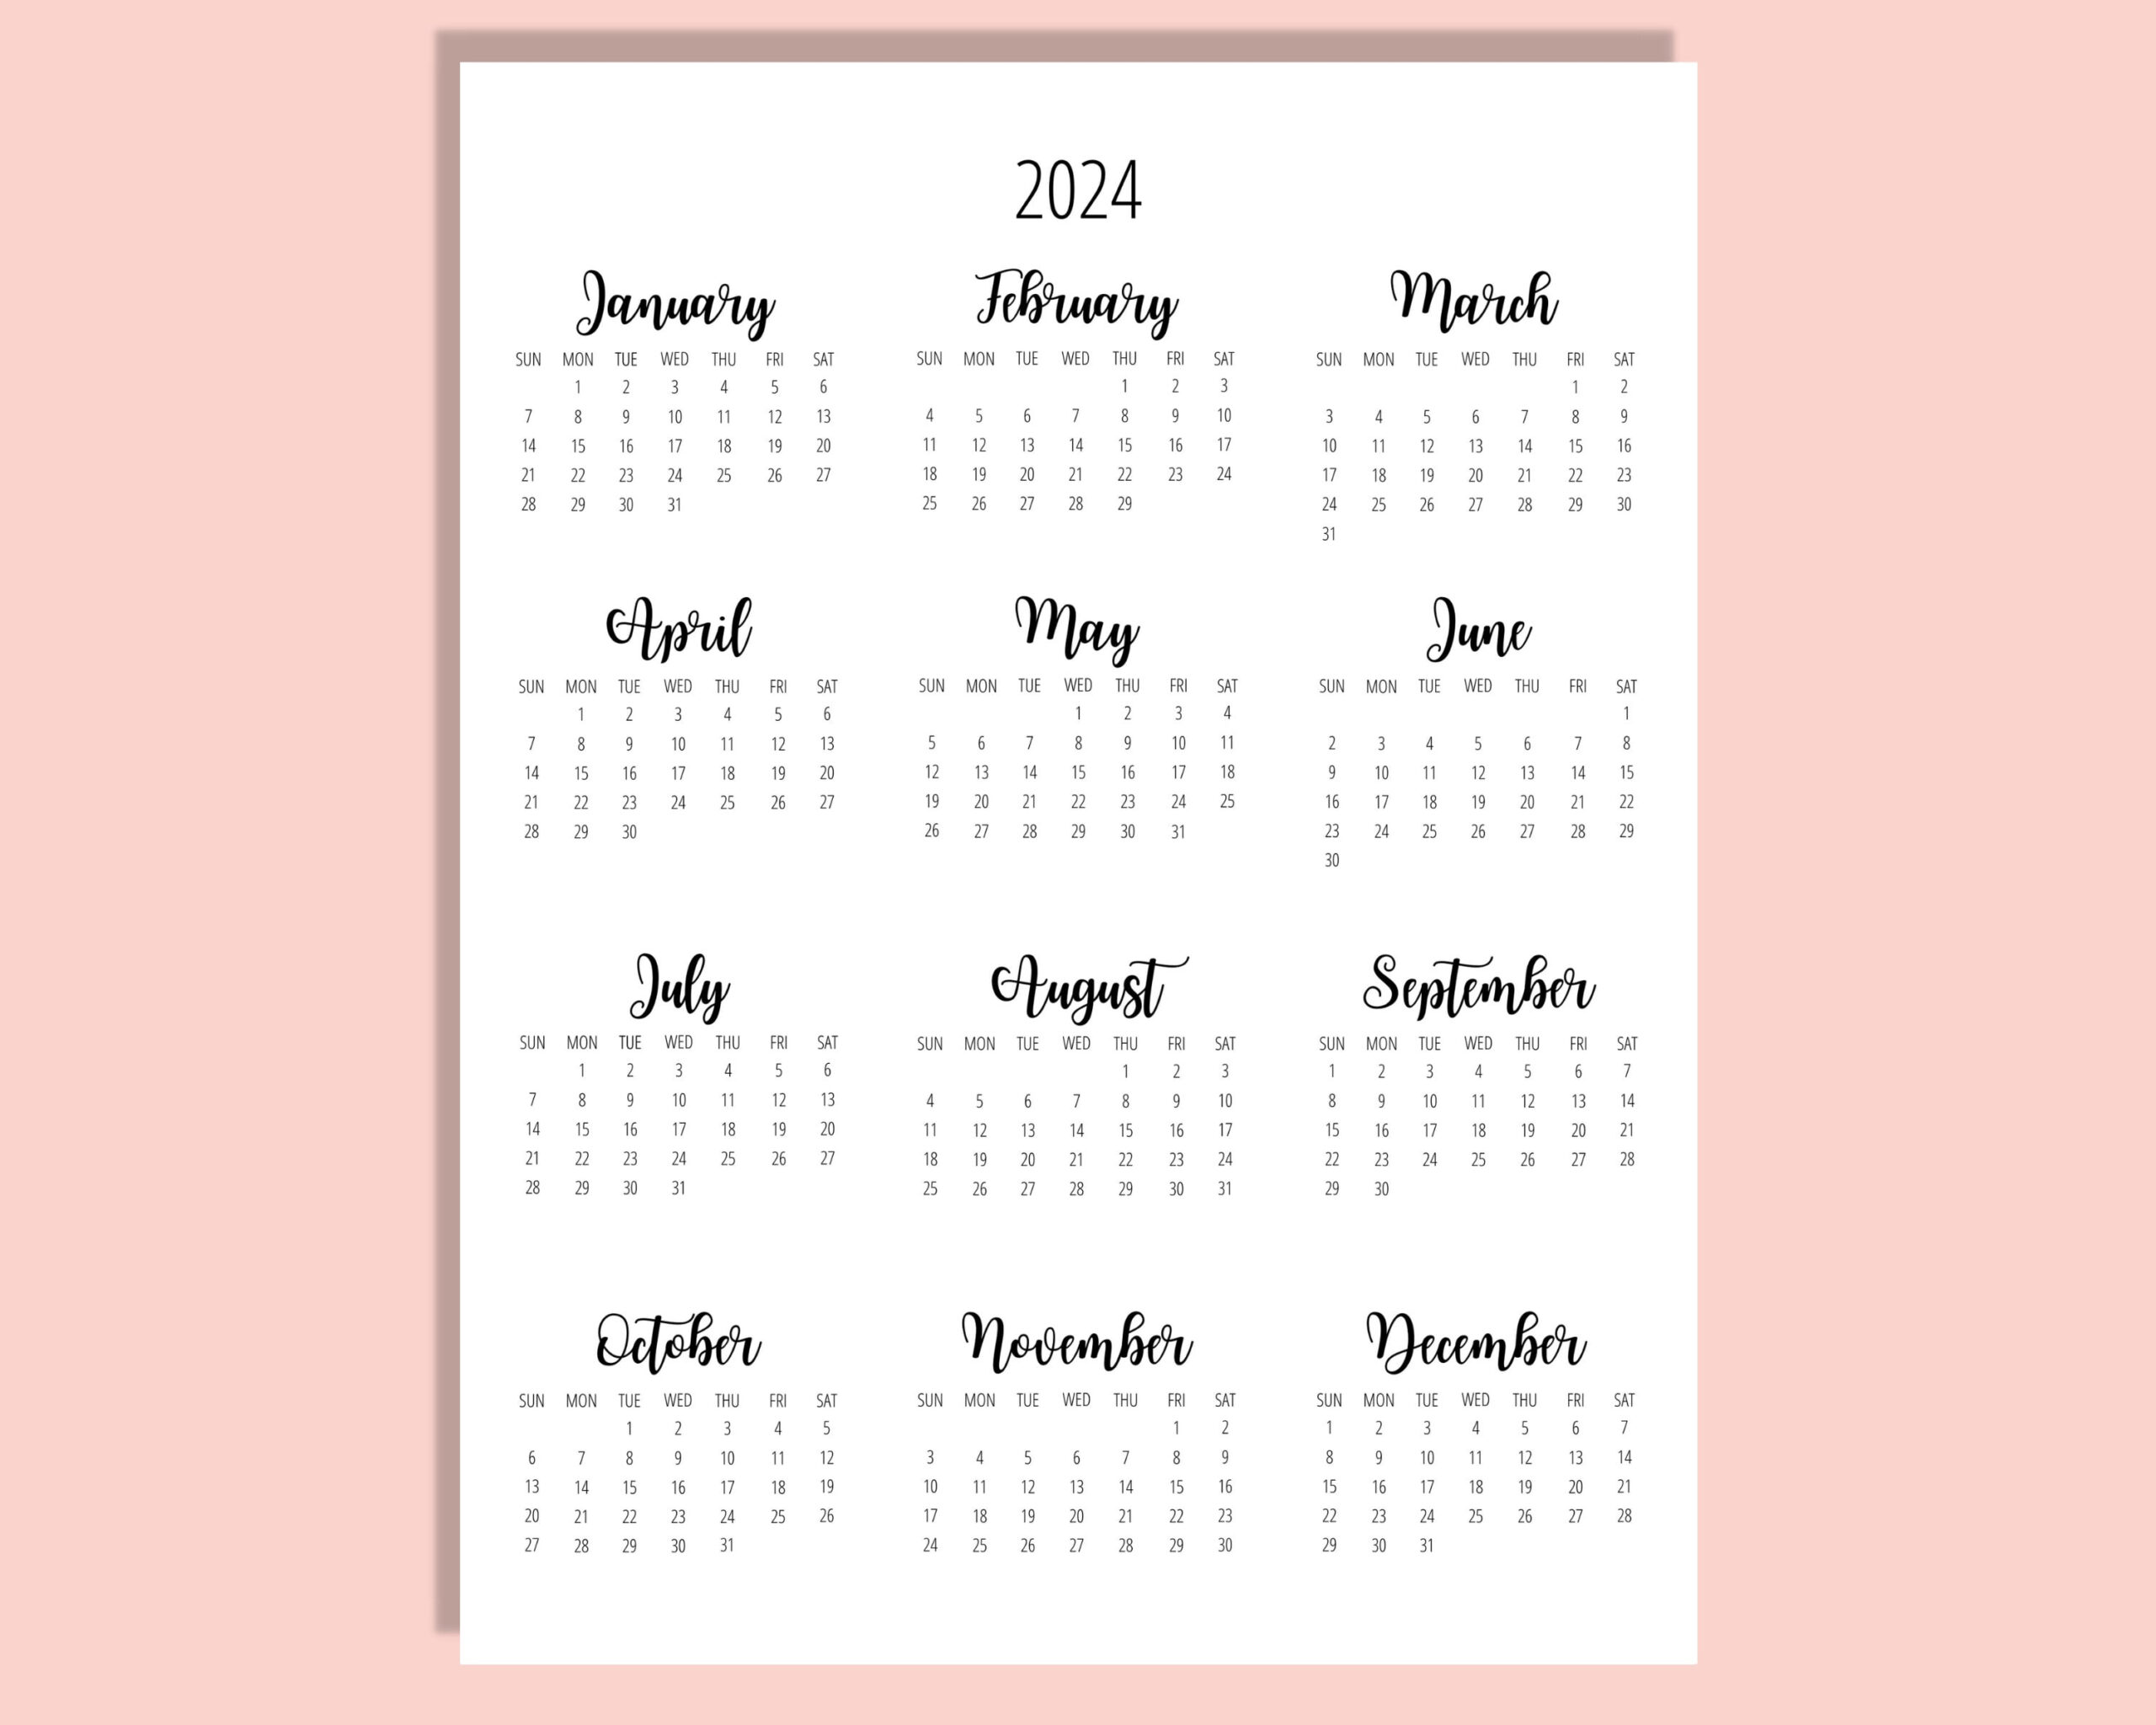 2024 Calendar Template 8.5 X 11 Inches Vertical Year At A - Etsy for 2024 Calendar 8.5 X 11 Printable